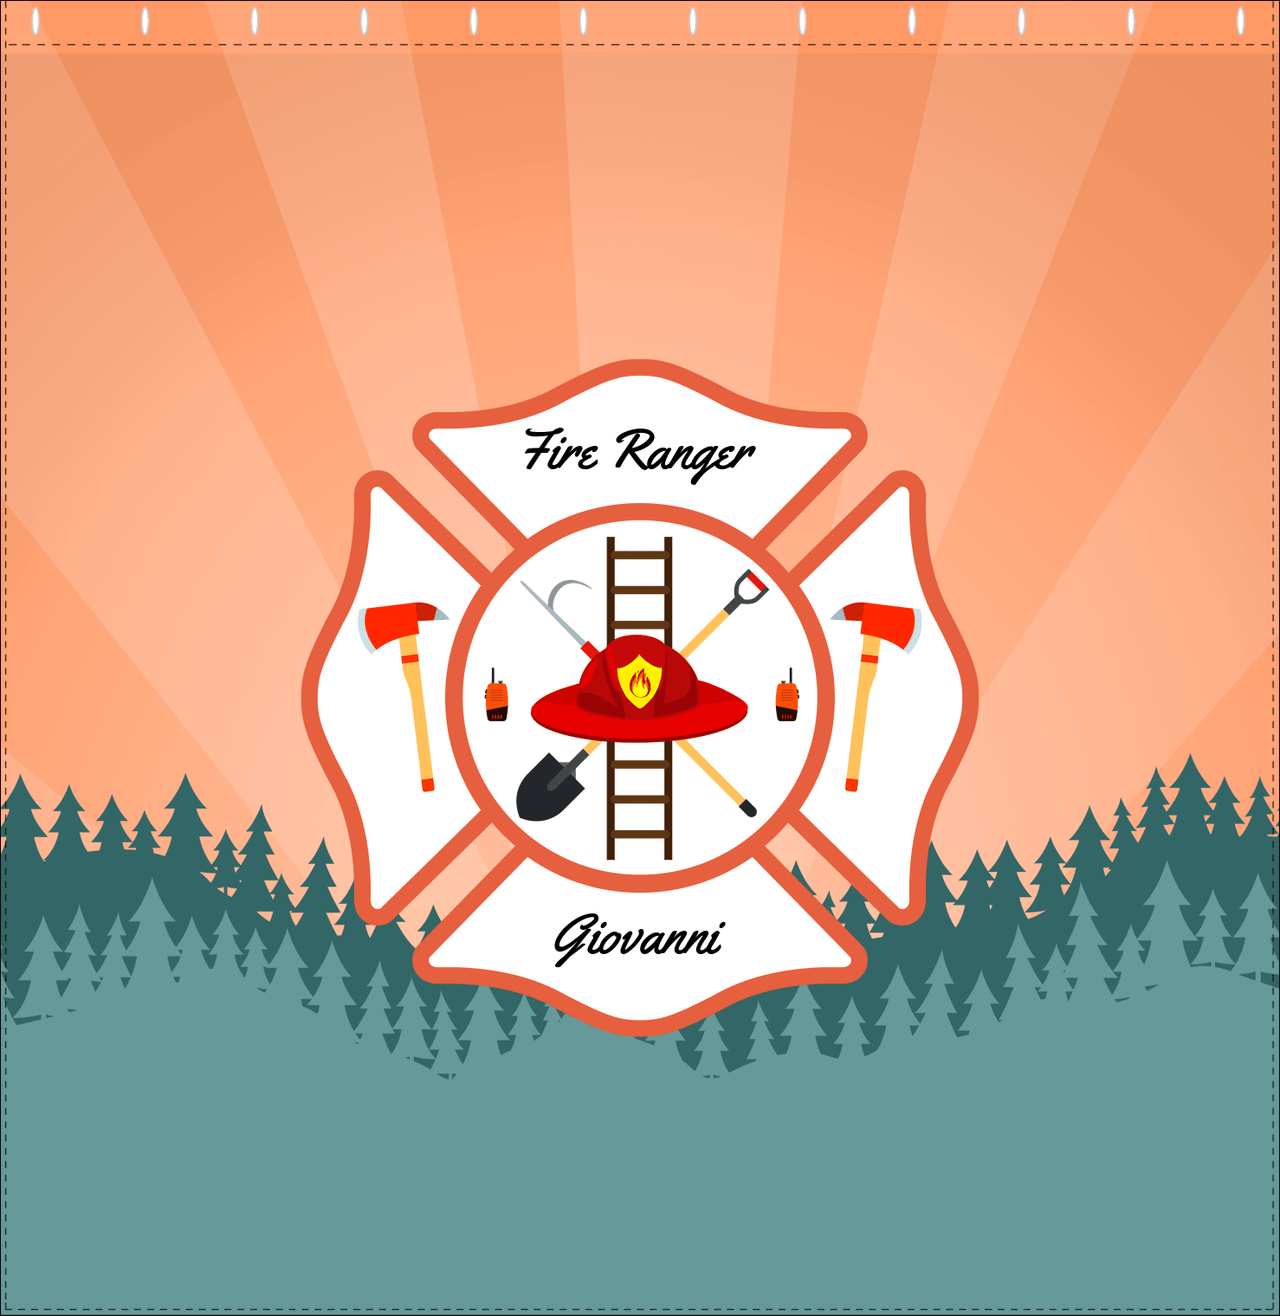 Personalized Fire Truck Shower Curtain XI - Orange Background - Decorate View